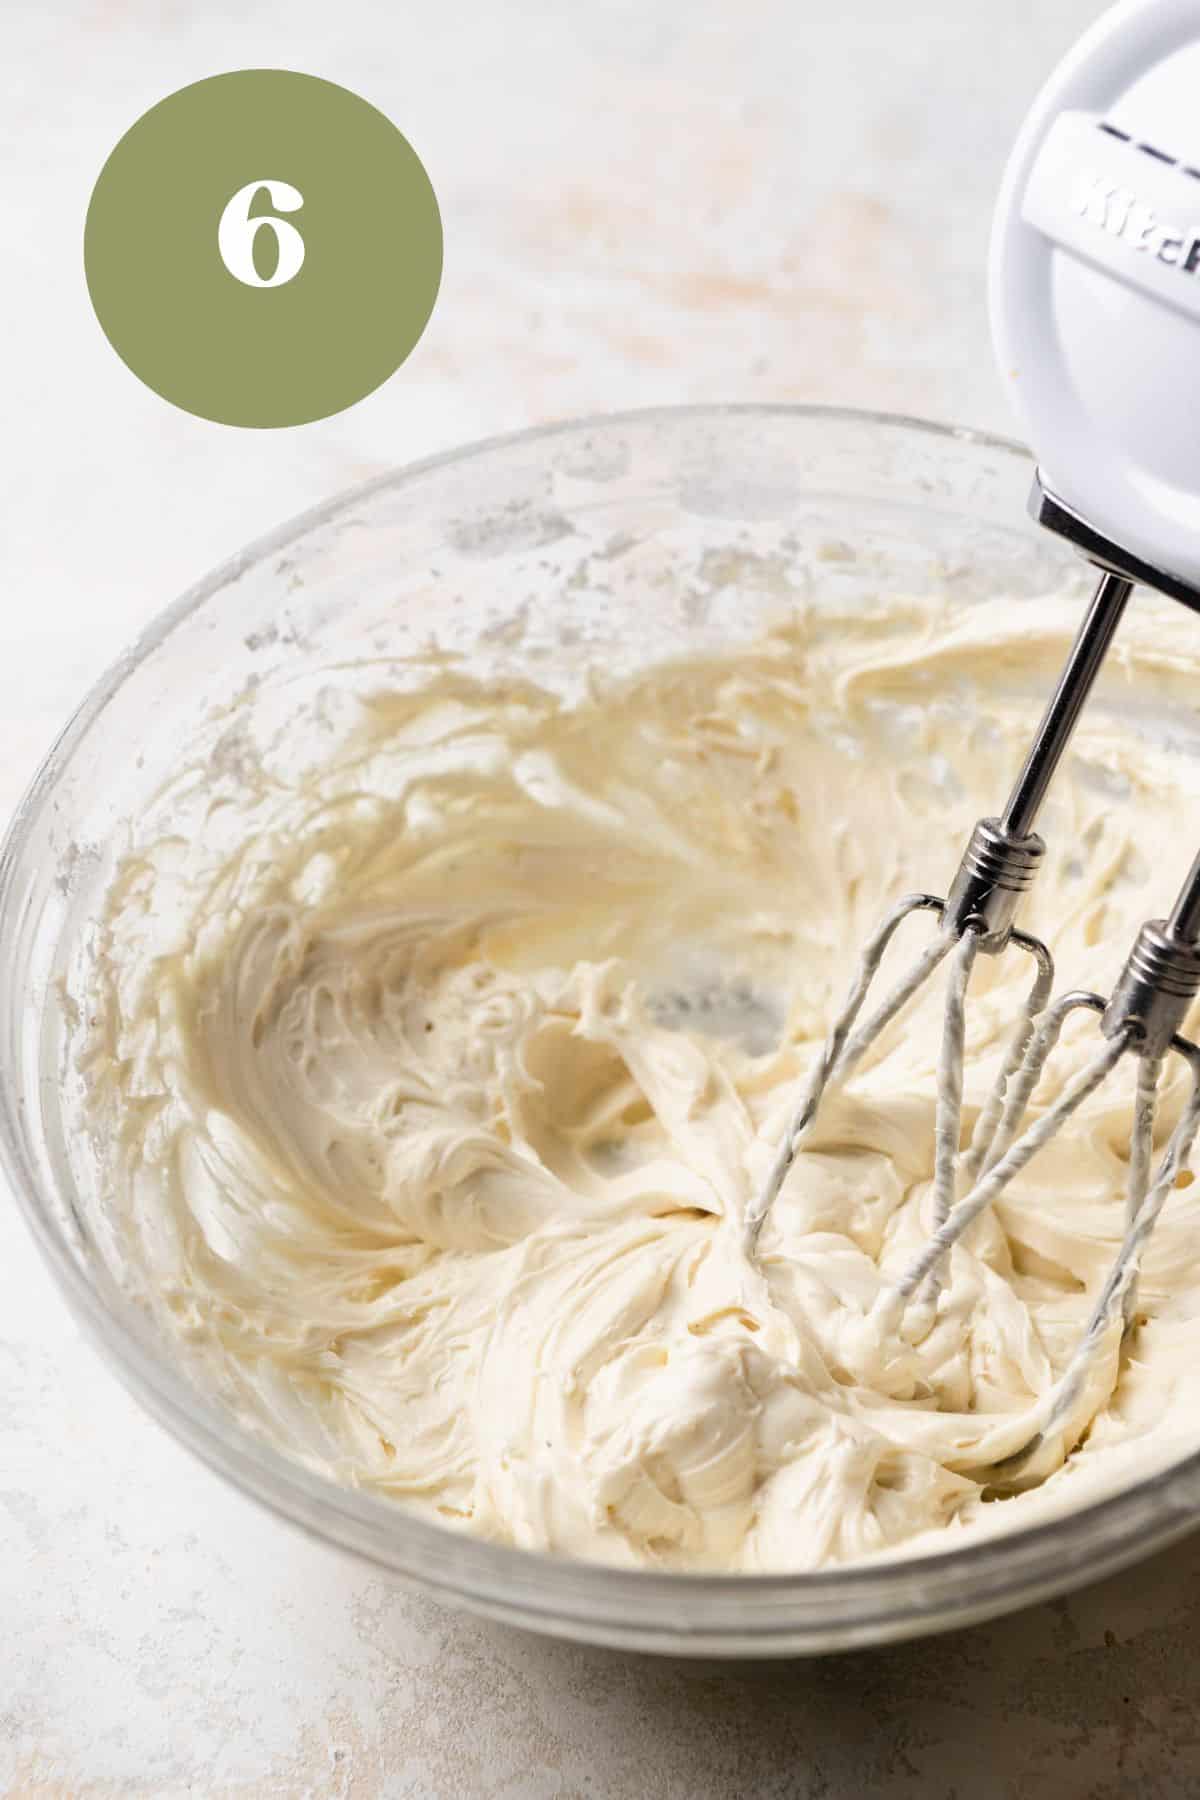 Beating cream cheese frosting in a bowl with a hand mixer.